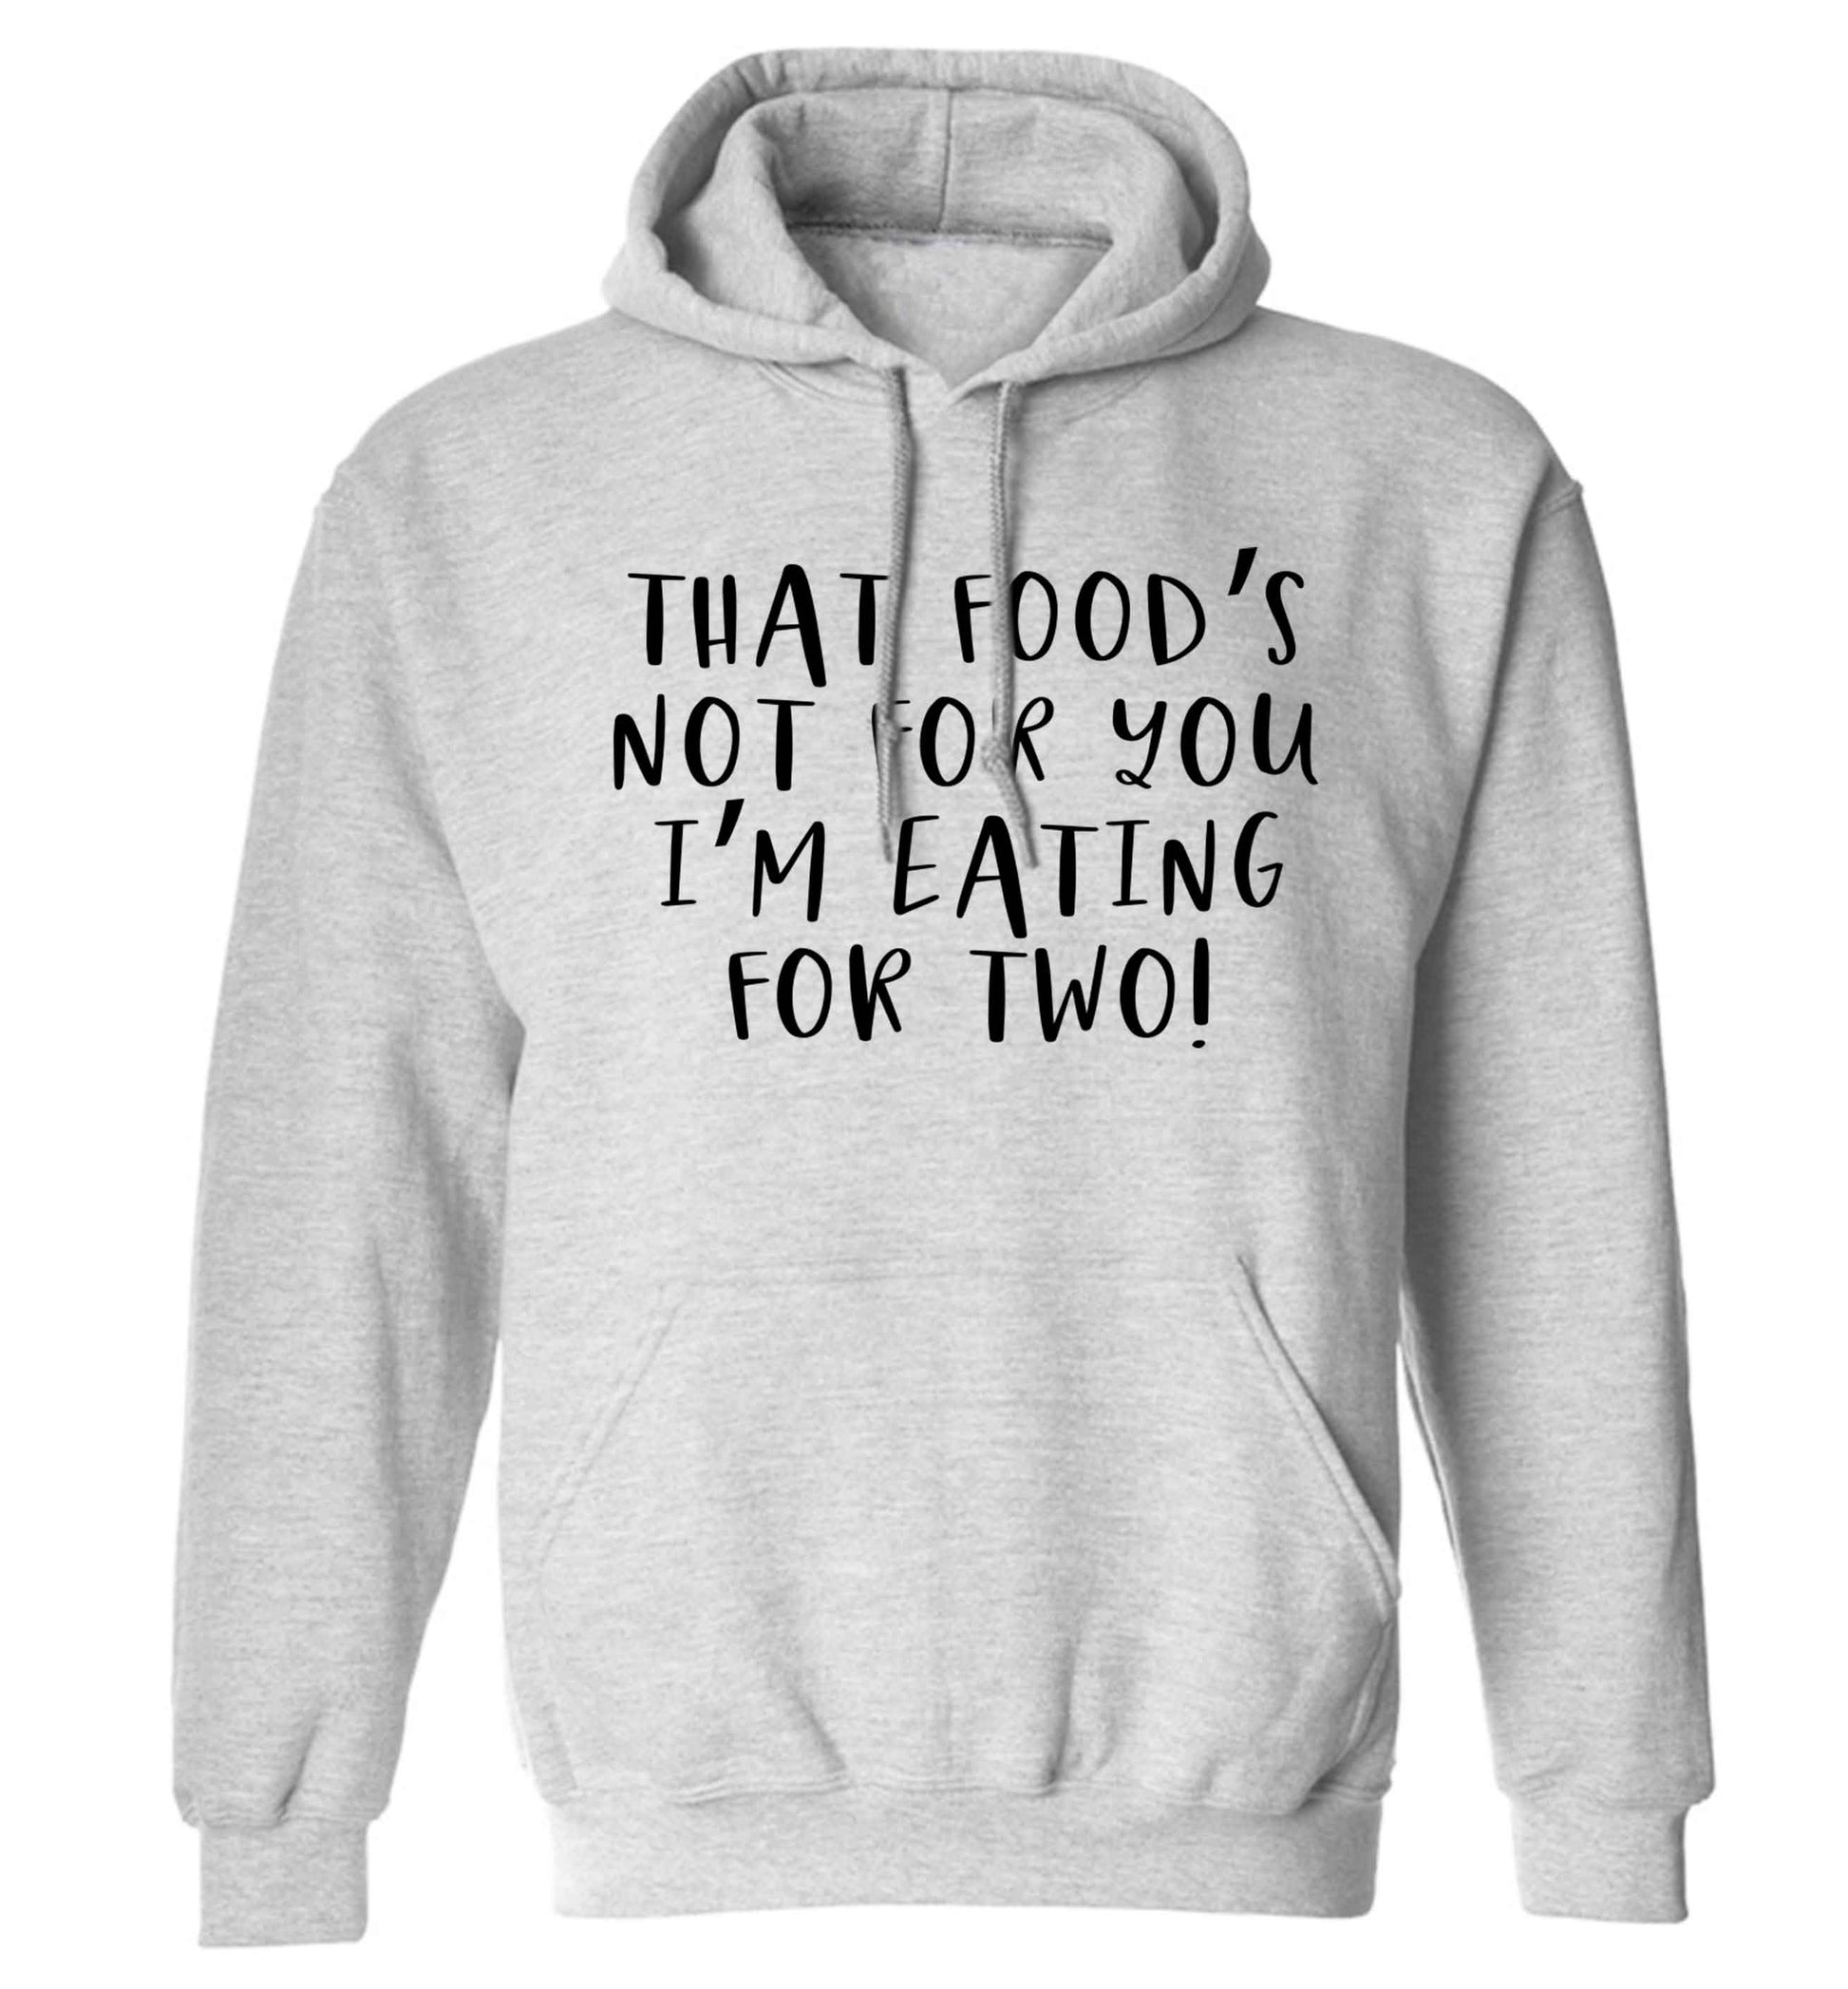 That food's not for you I'm eating for two adults unisex grey hoodie 2XL